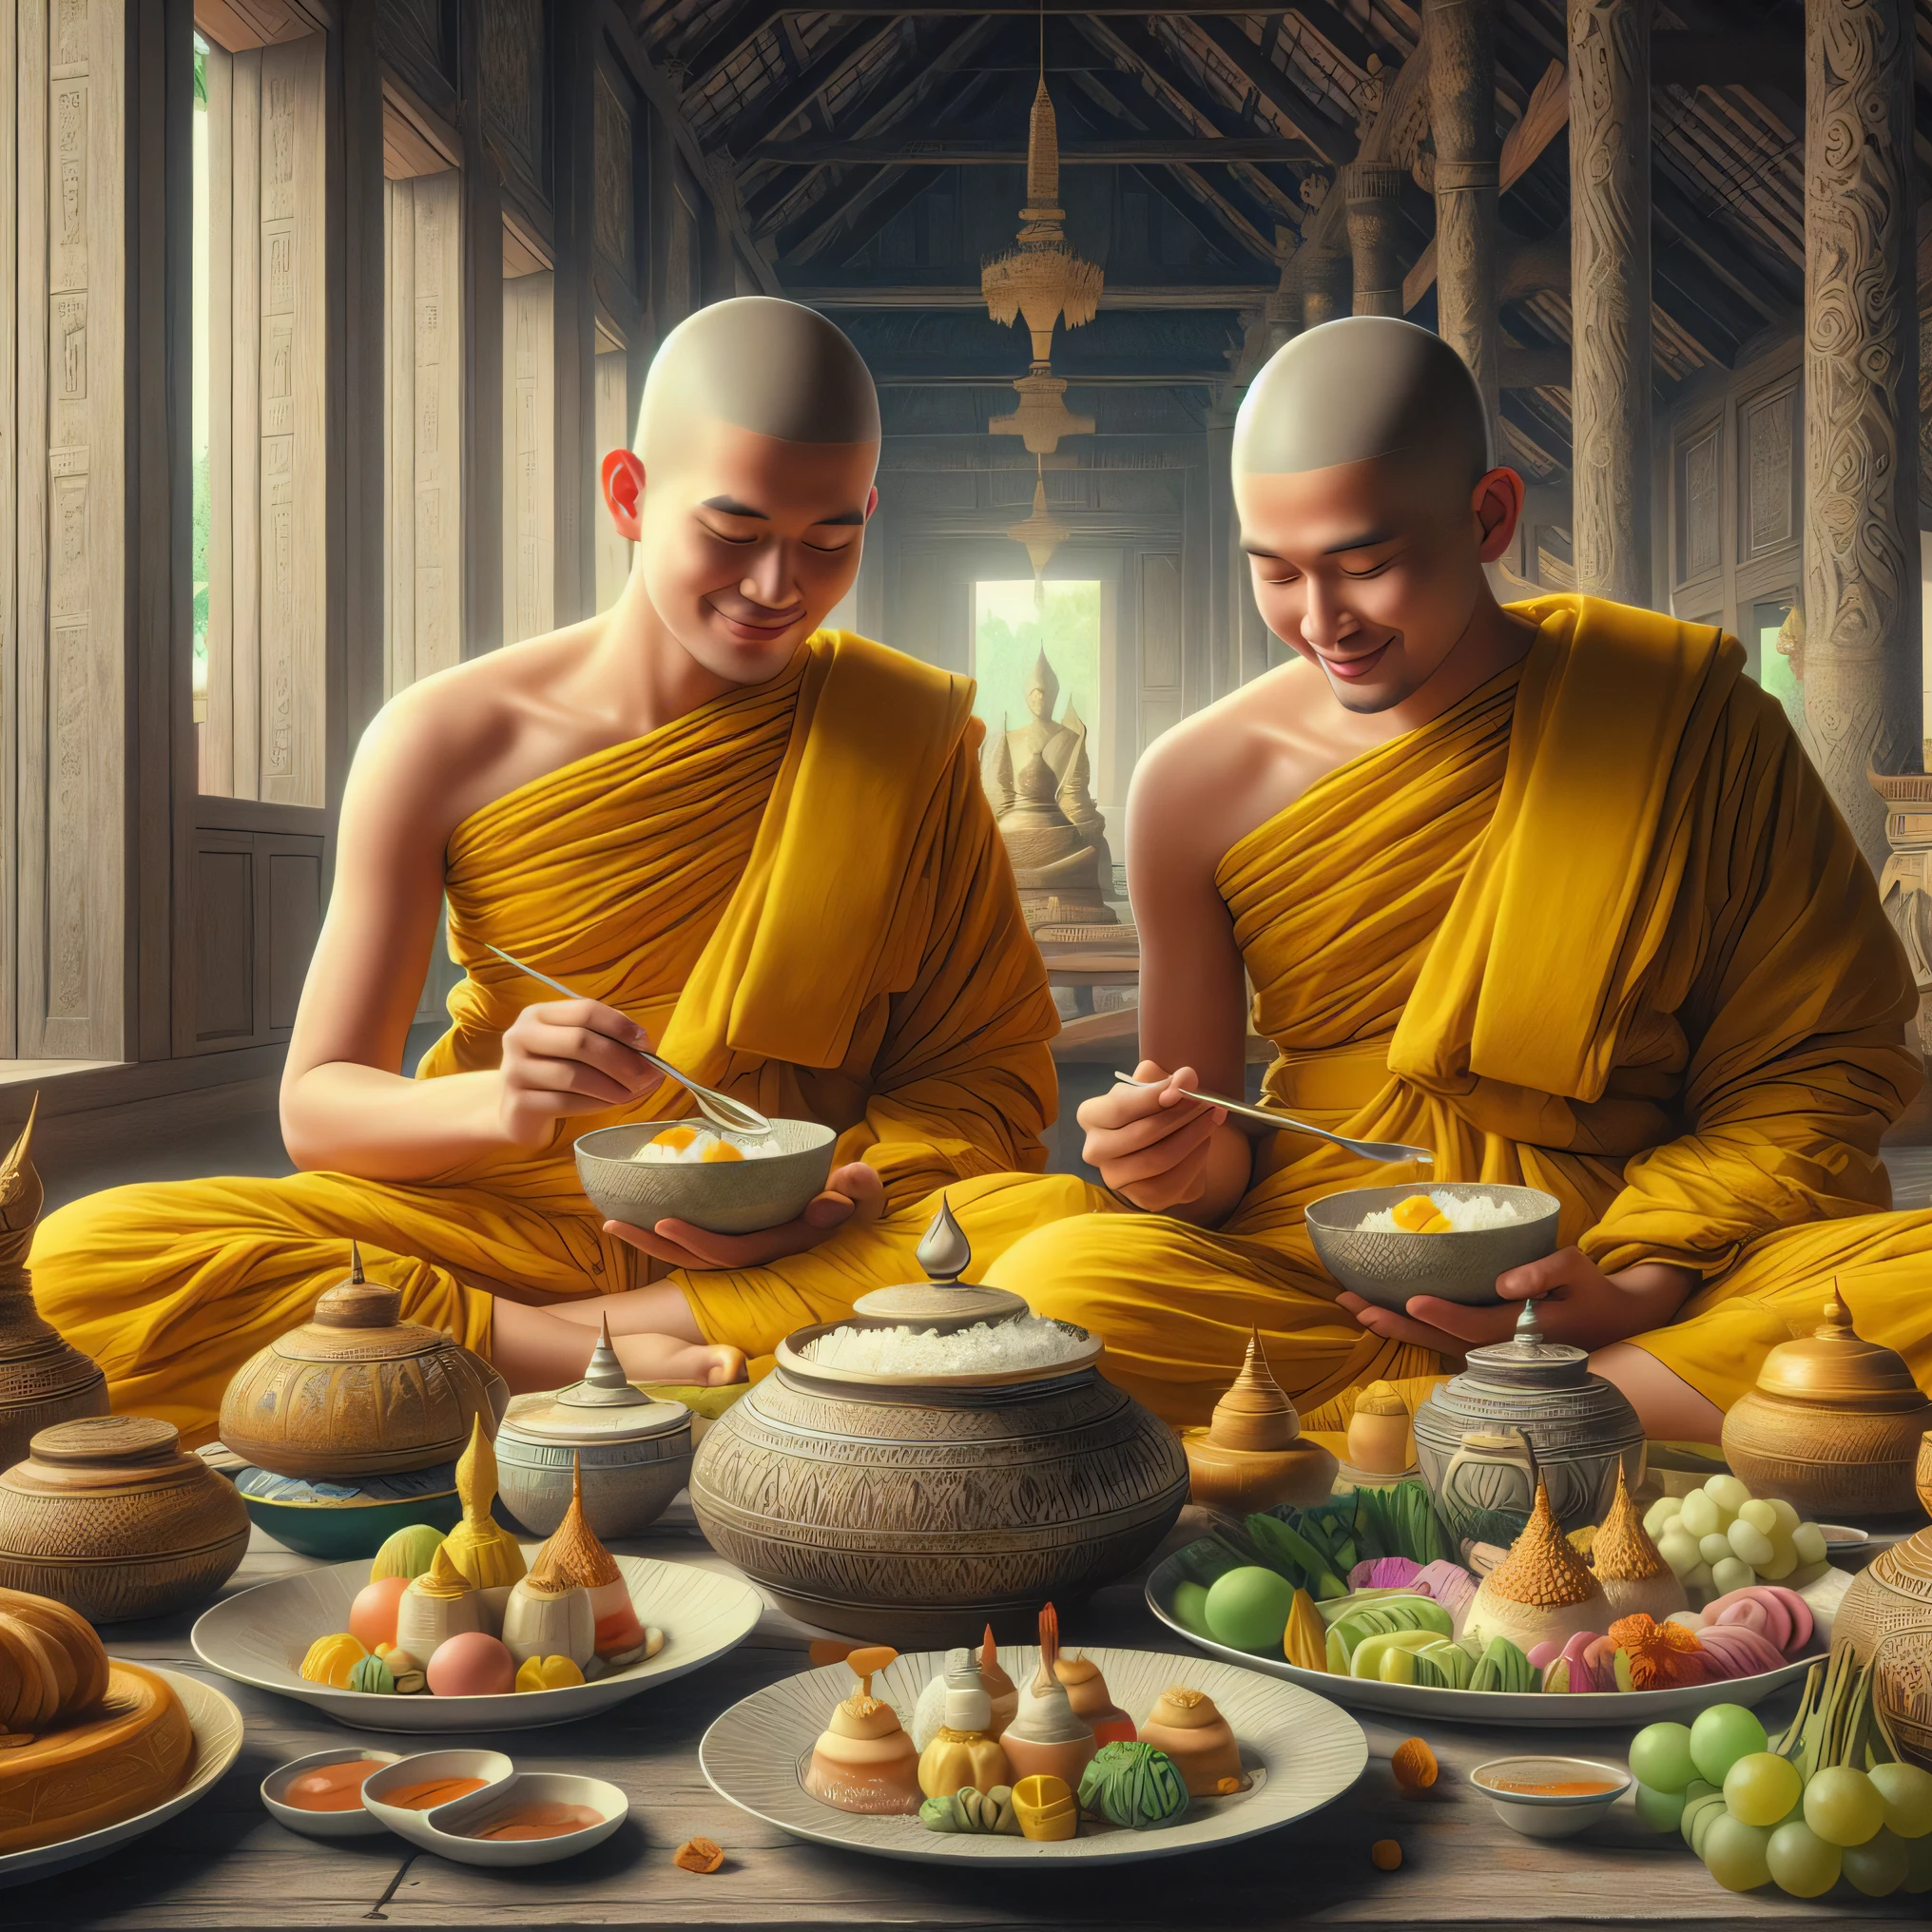 two monjes sitting on a table with plates of food and bowls of fruit, monjes, tithi luadthong, in style of duchanee, monje clothes, por John La Gatta, Arte tailandés, Budista, Budista monje, budismo, in a temple, monje, 2 1 st century monje, duchanee, monje meditate